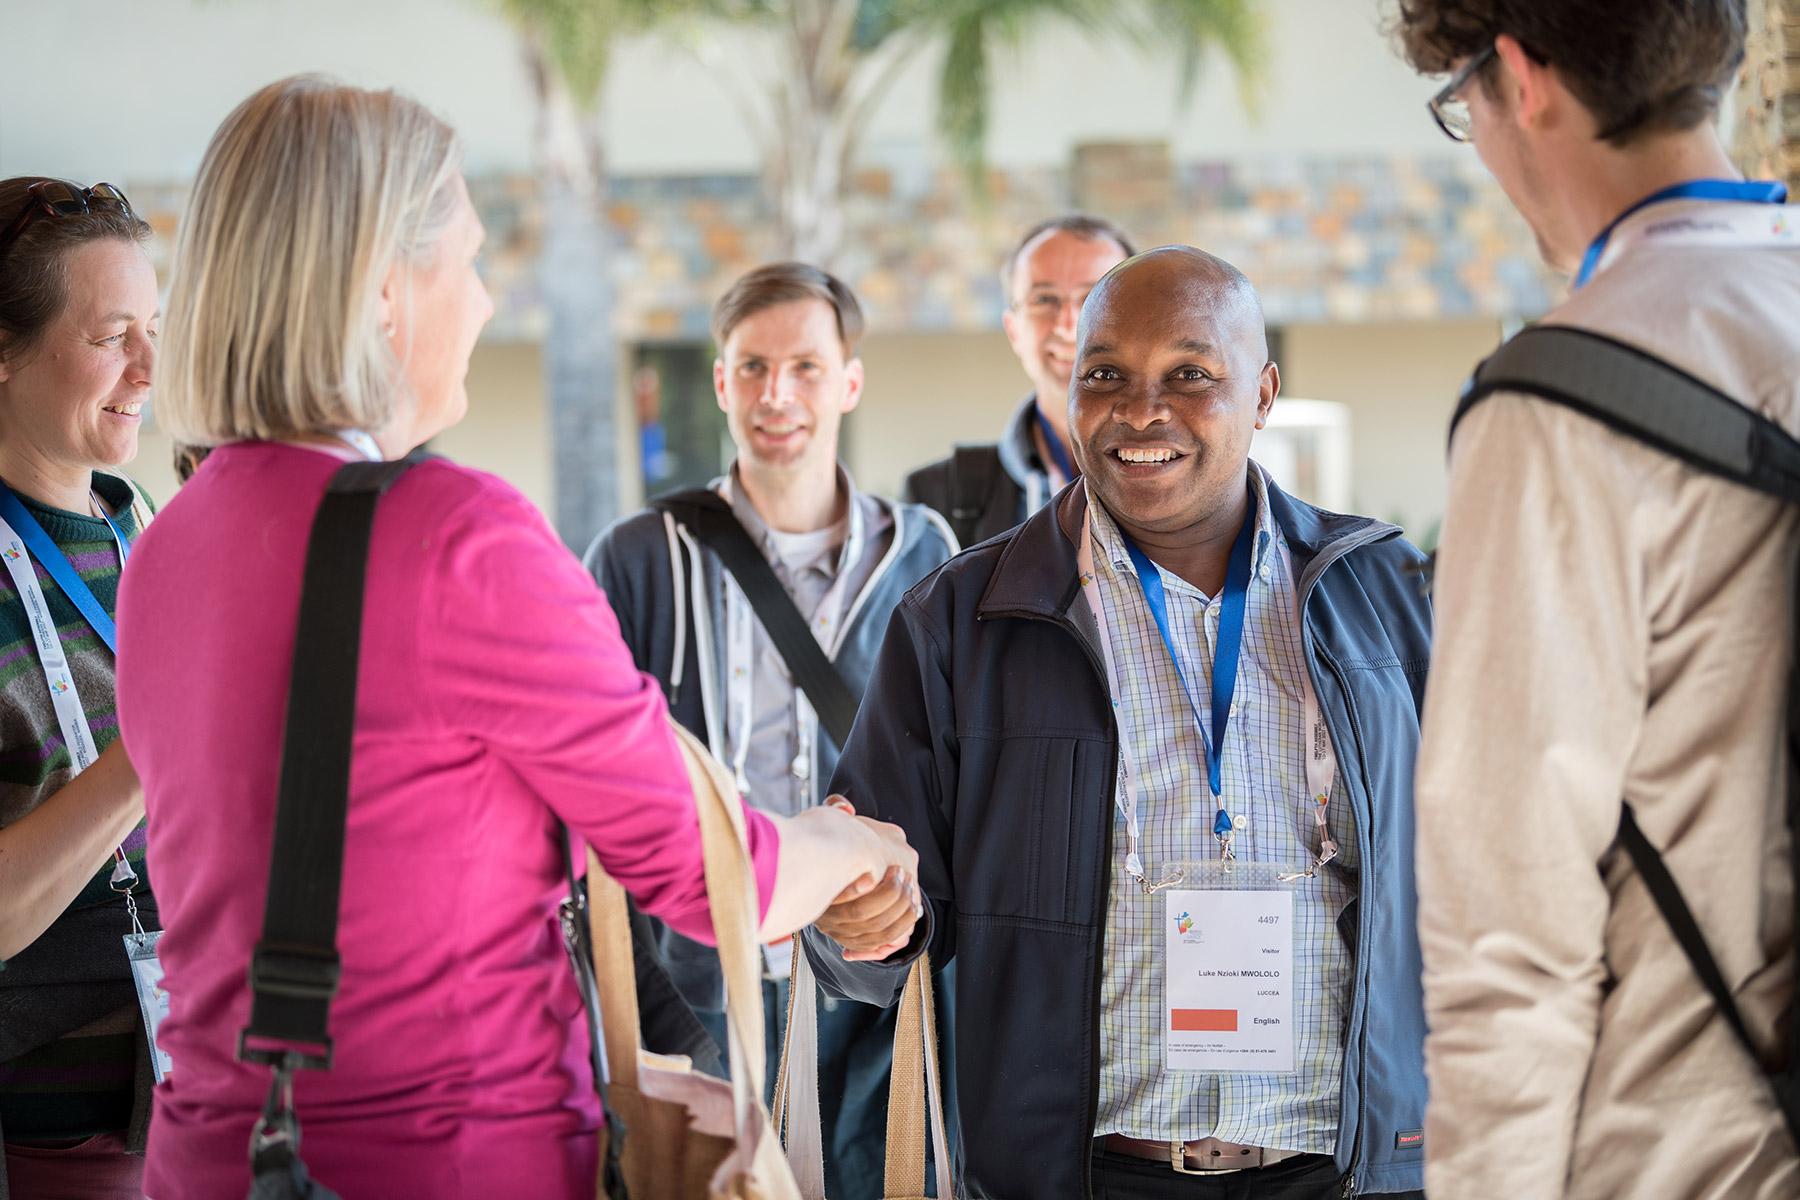 The LWF strives for gender and intergenerational balance at its gatherings. Photo: LWF/Albin Hillert